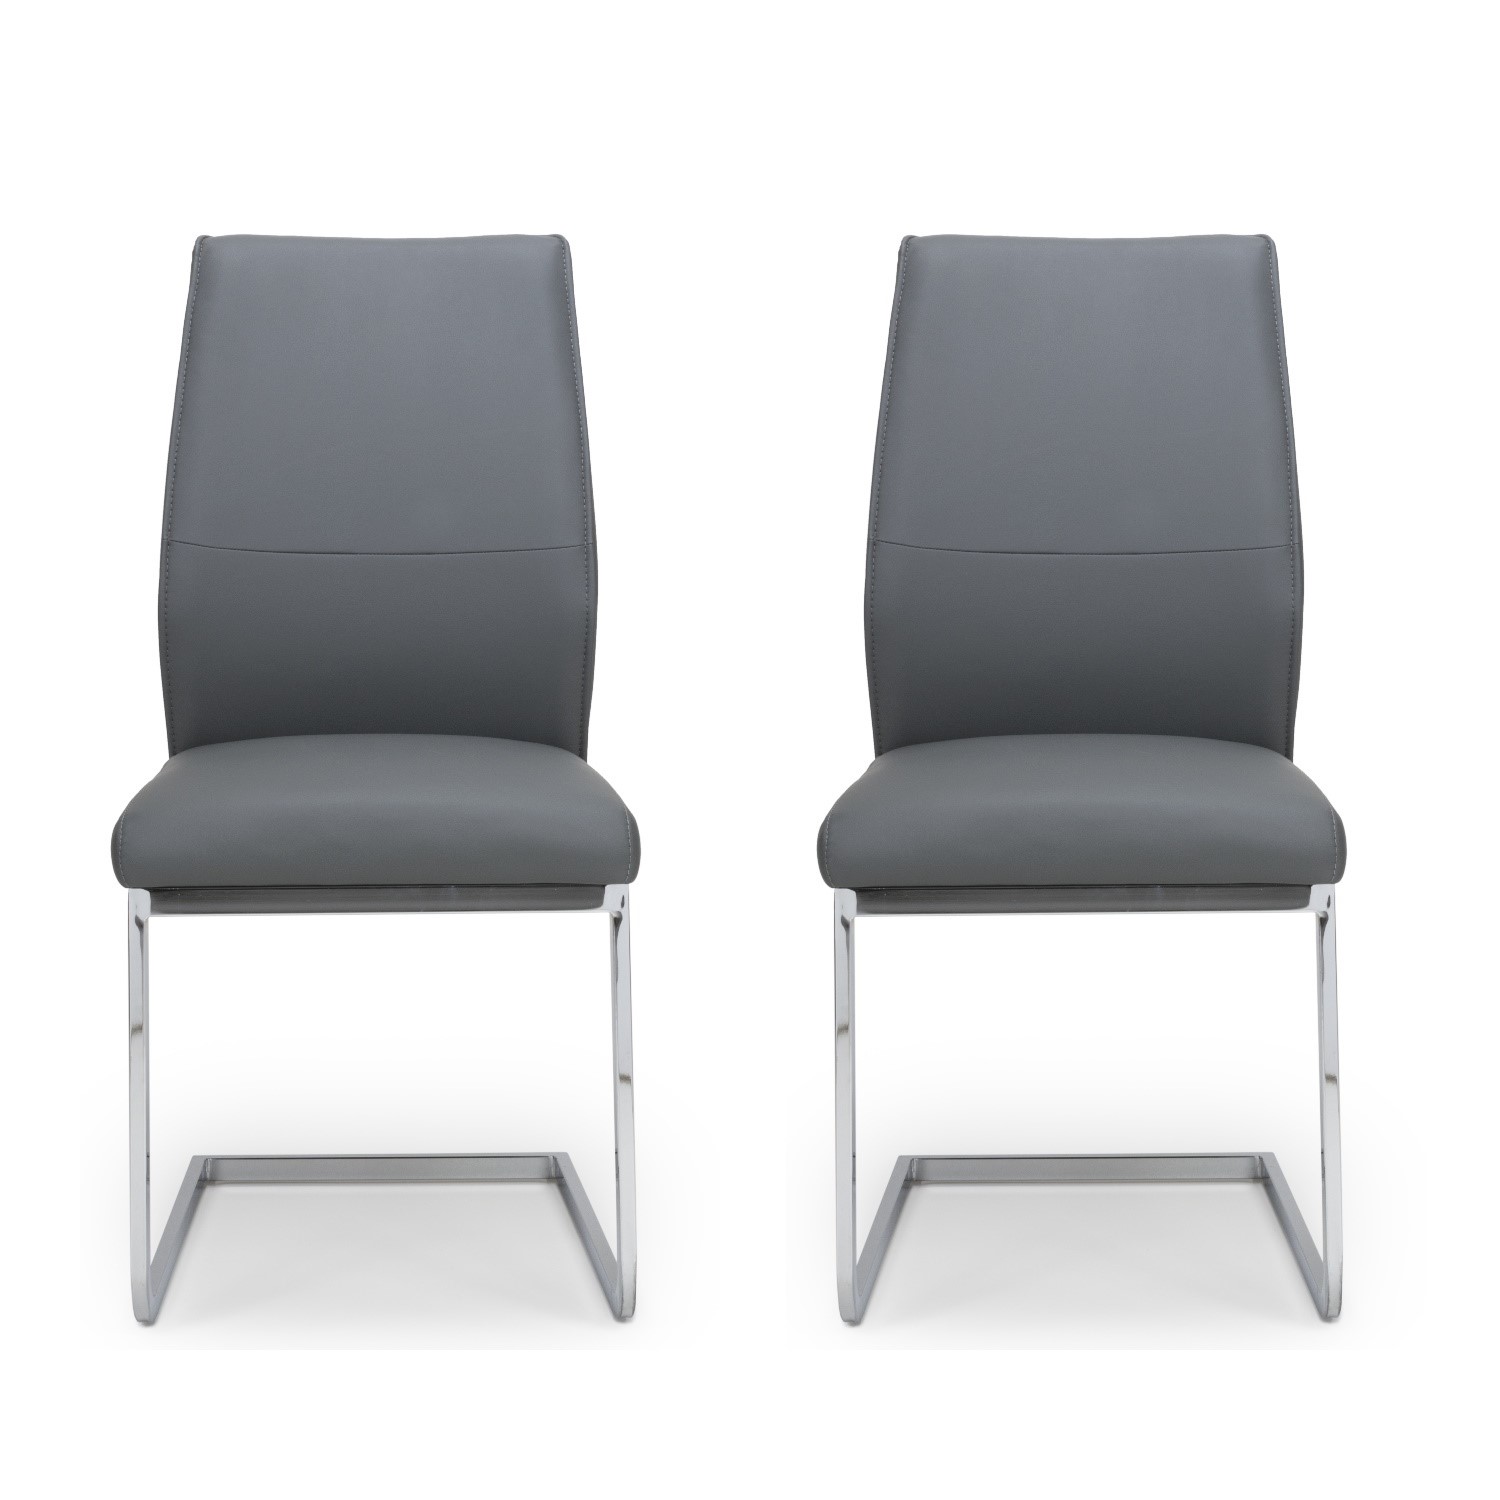 Photo of Set of 2 grey faux leather cantilever dining chairs - hilton